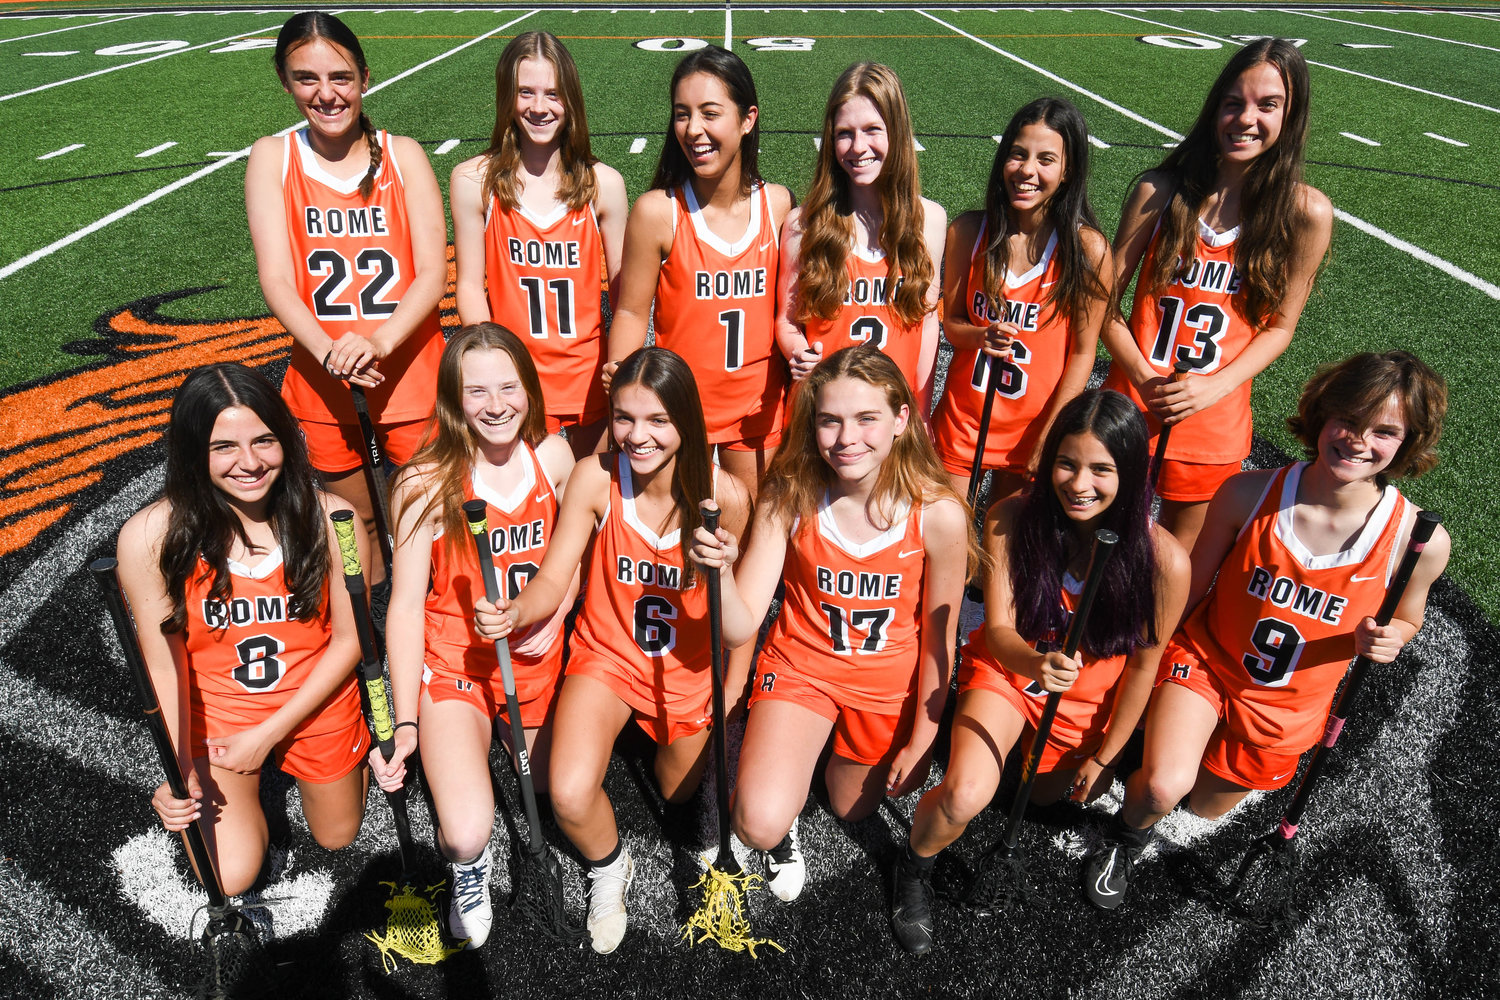 Six sets of sisters play together on Rome Free Academy’s girls lacrosse team. There’s identical twins Fiona and Isibeal McMahon (11 and 10) as well as two other sets of twins — Chase and Shannen Calandra (13 and 9) and Giavonna and Jenavieve Cianfrocco (16 and 7). The other sisters are Danielle and Alyssa D’Aiuto (1 and 6), Brynn and Amelia Furbeck (2 and 17) and Drew and Danielle Kopek (22 and 8).